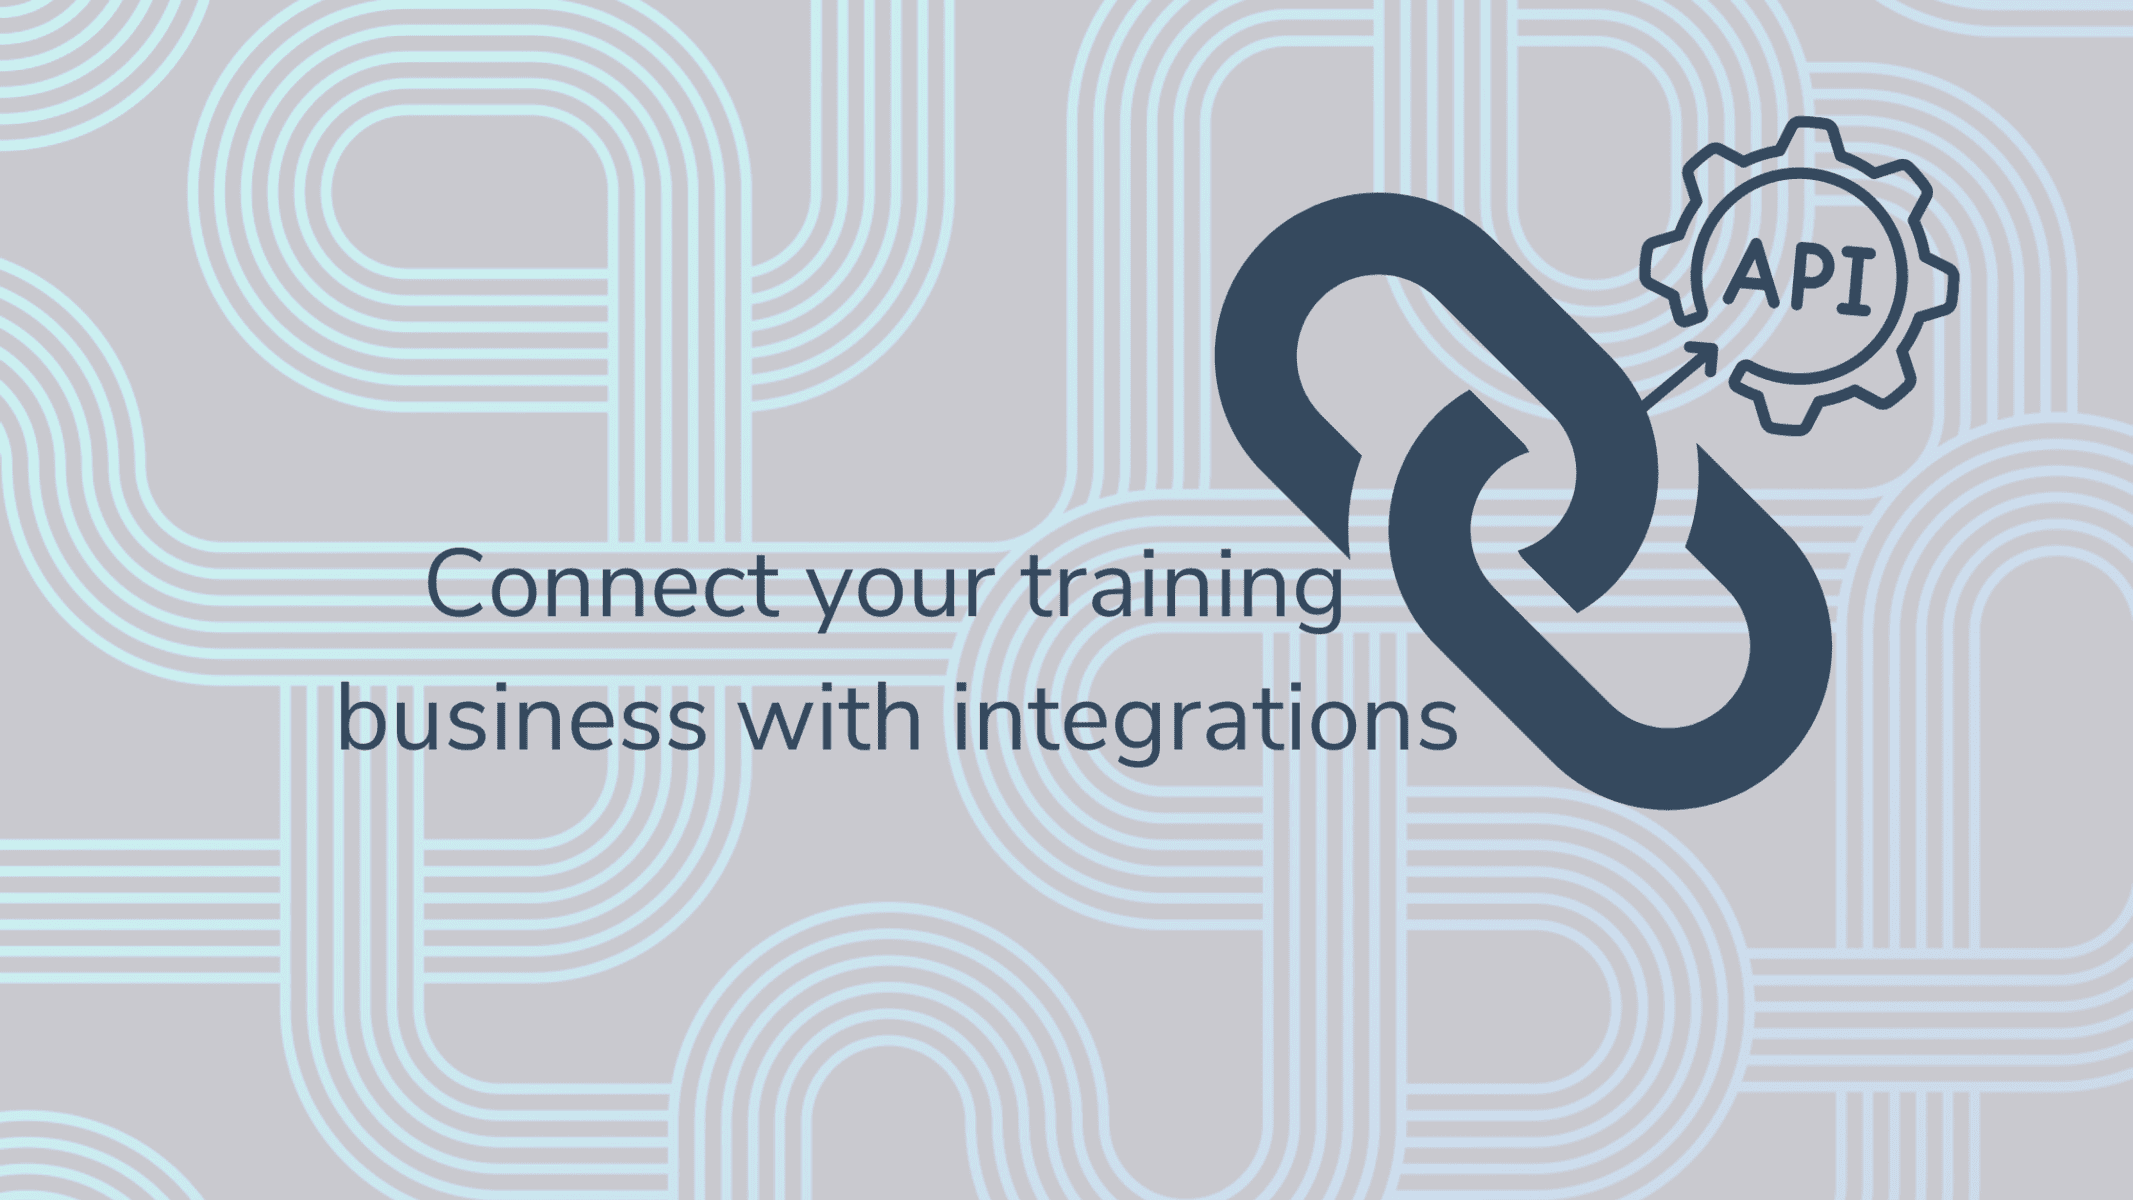 Connect your training business with integrations